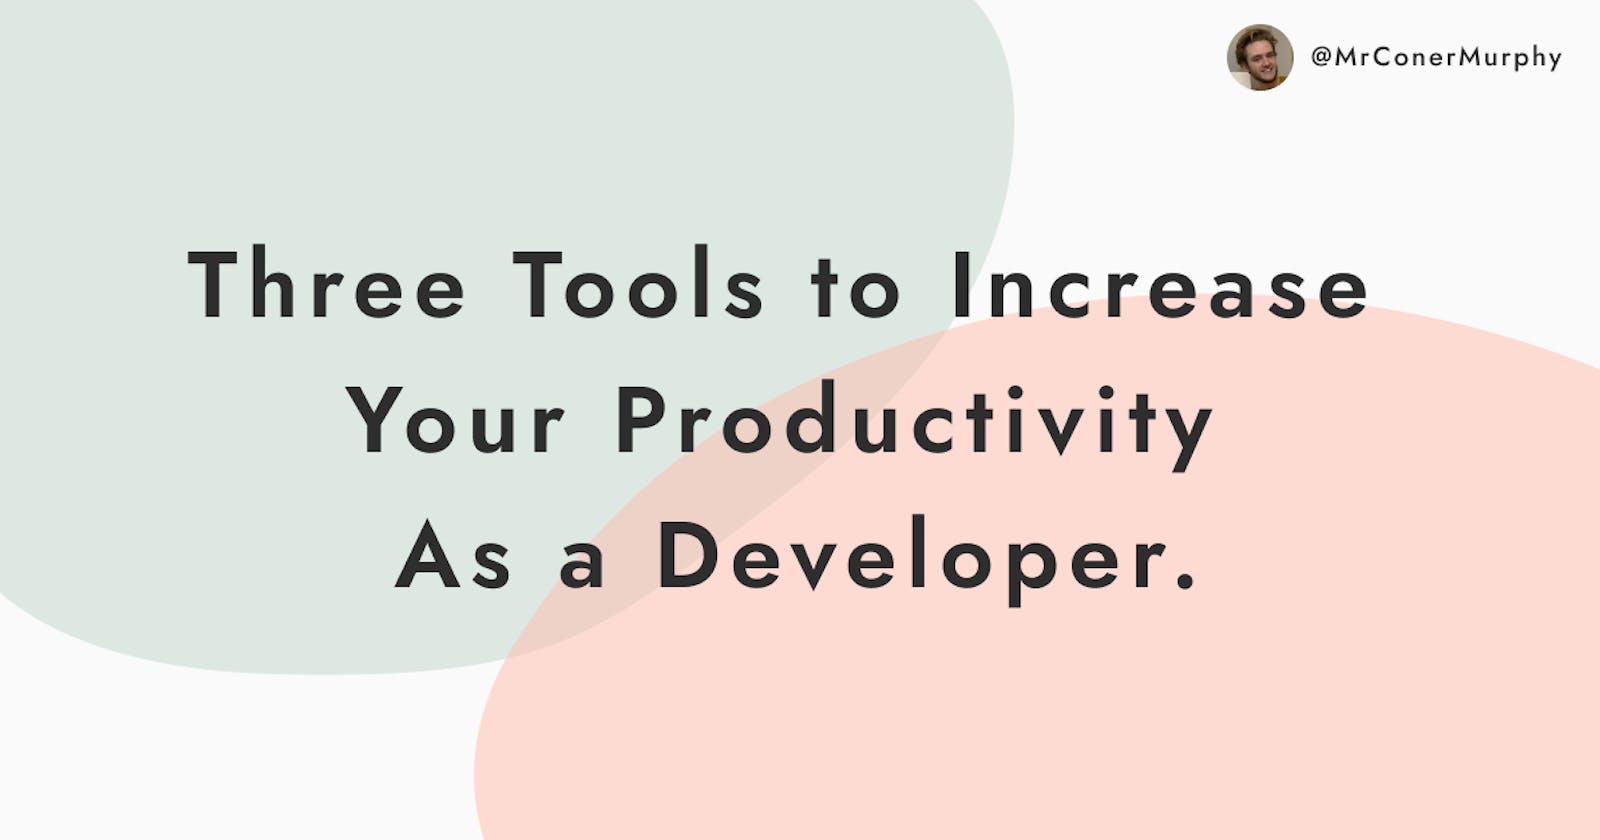 Three Tools to Increase Your Productivity As a Developer.